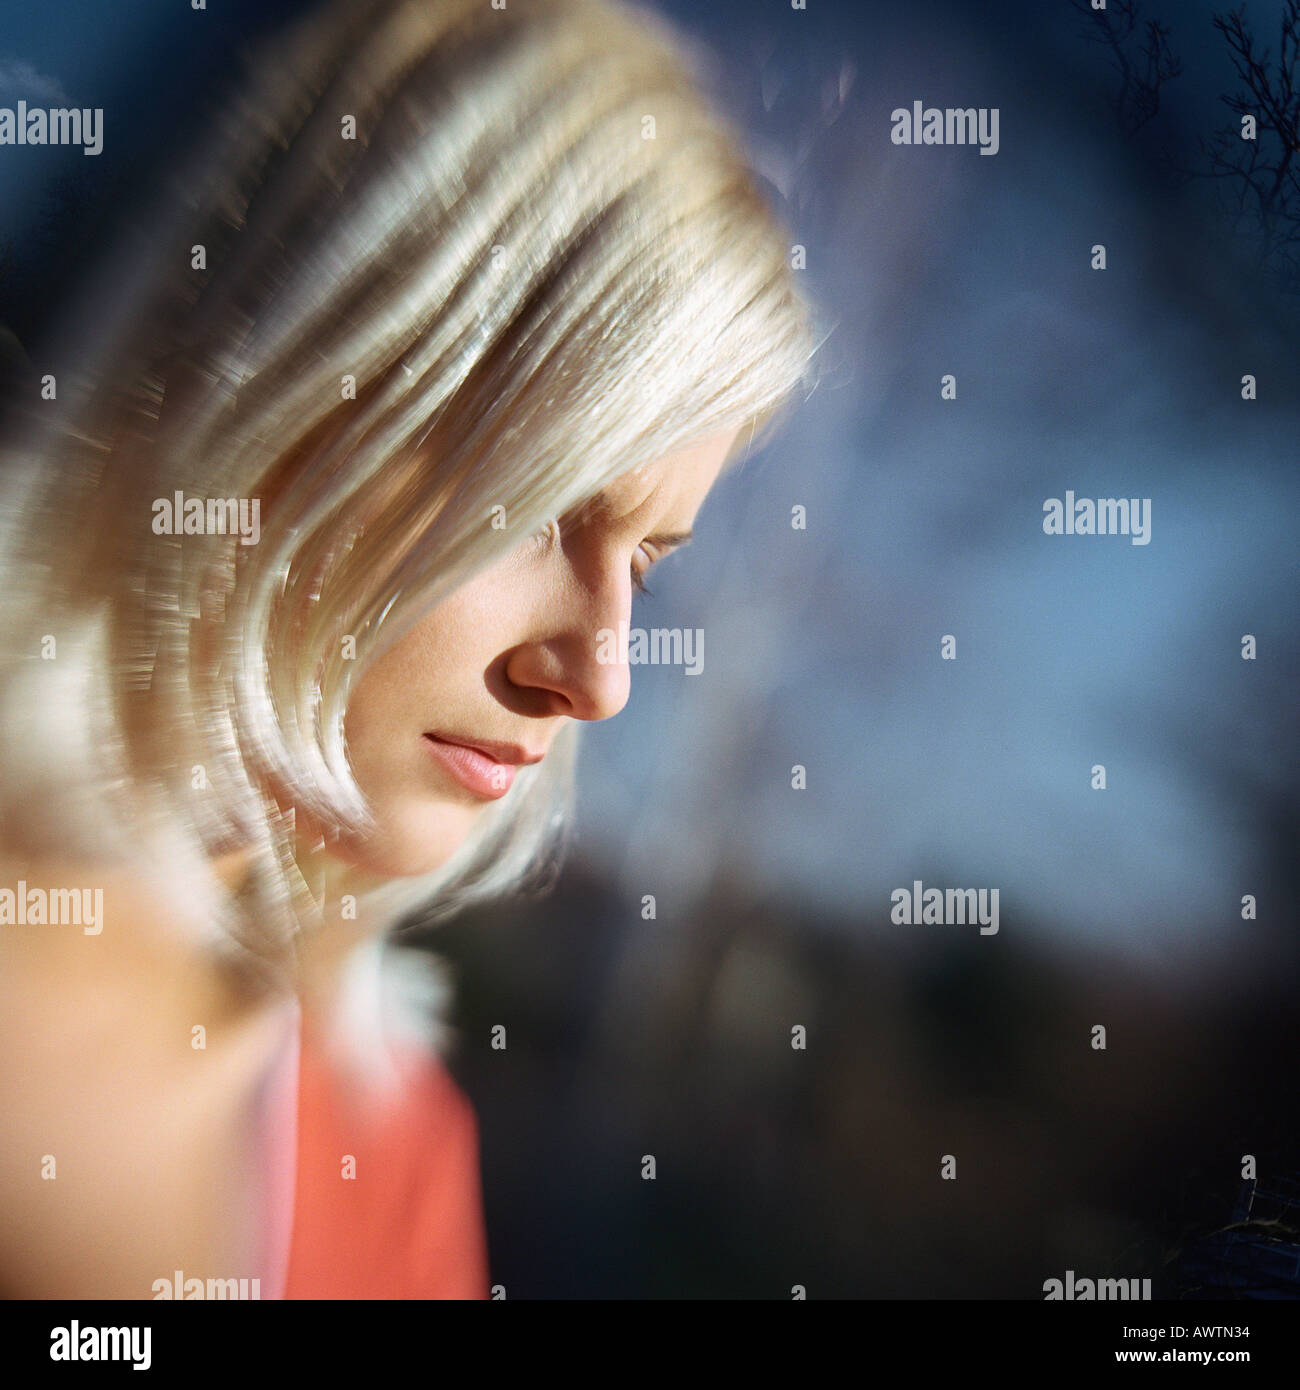 Woman looking down, side view, portrait Stock Photo